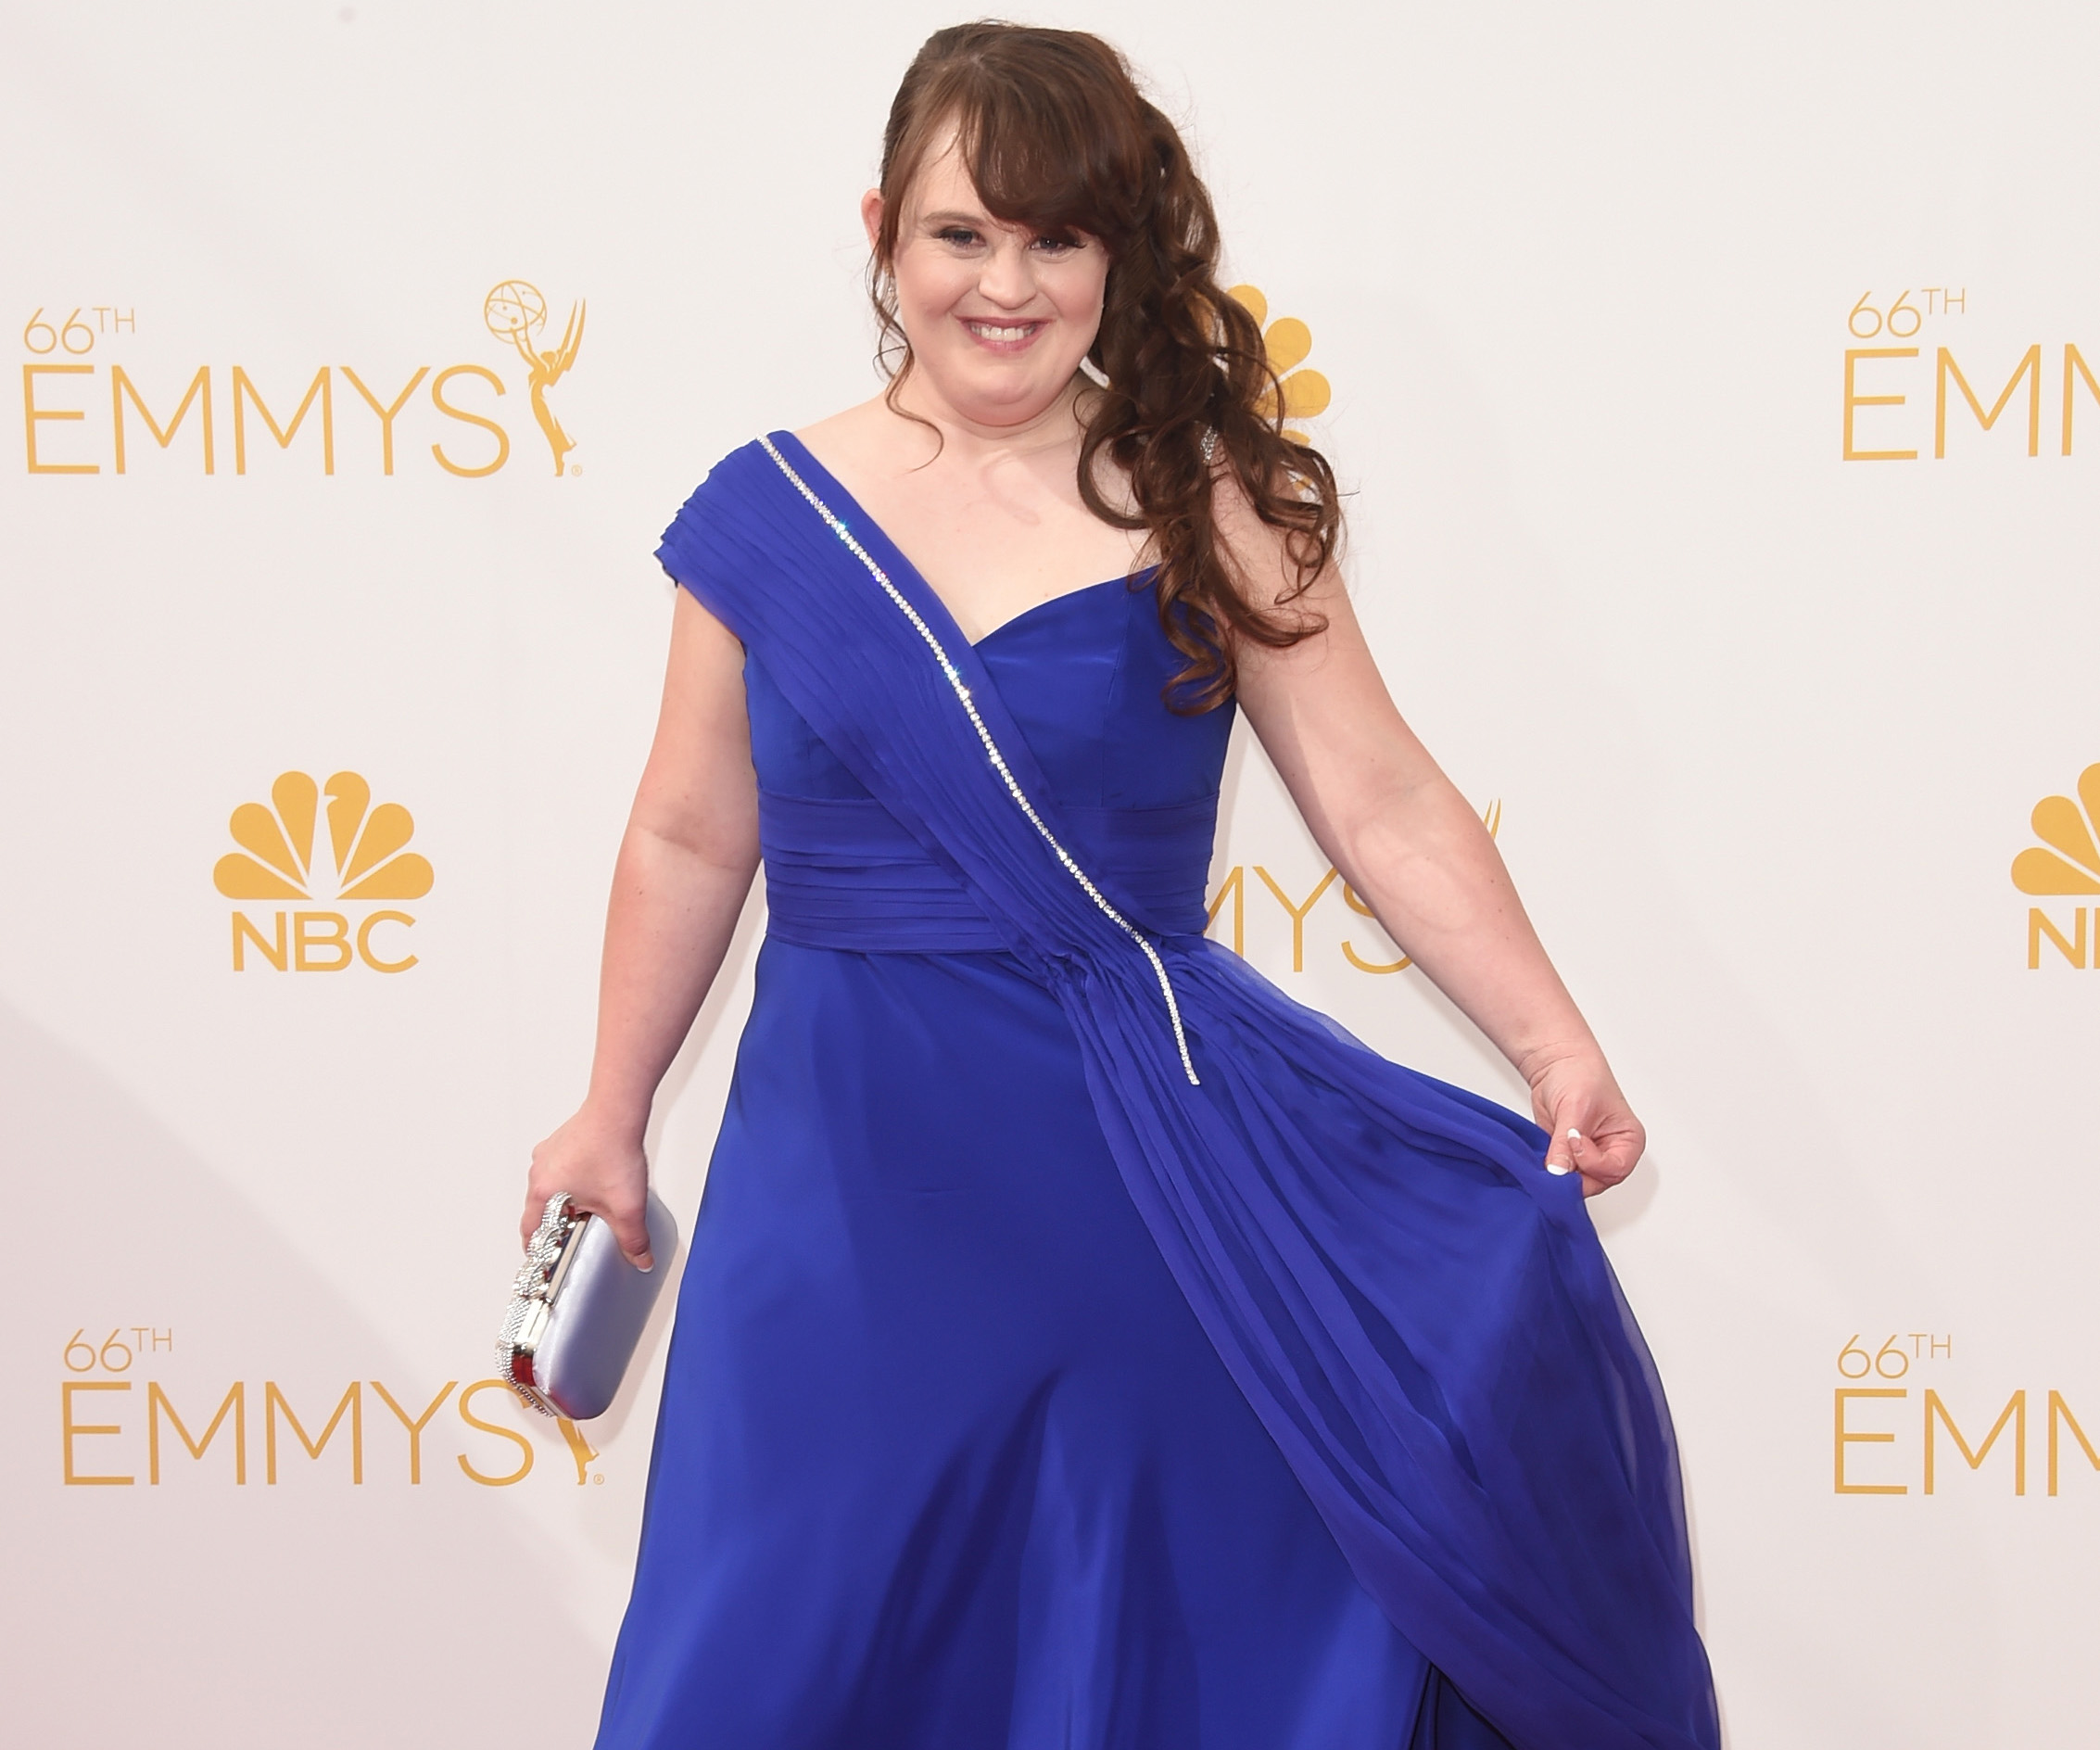 The actress with Down syndrome wowing Hollywood – and she’s coming to Australia